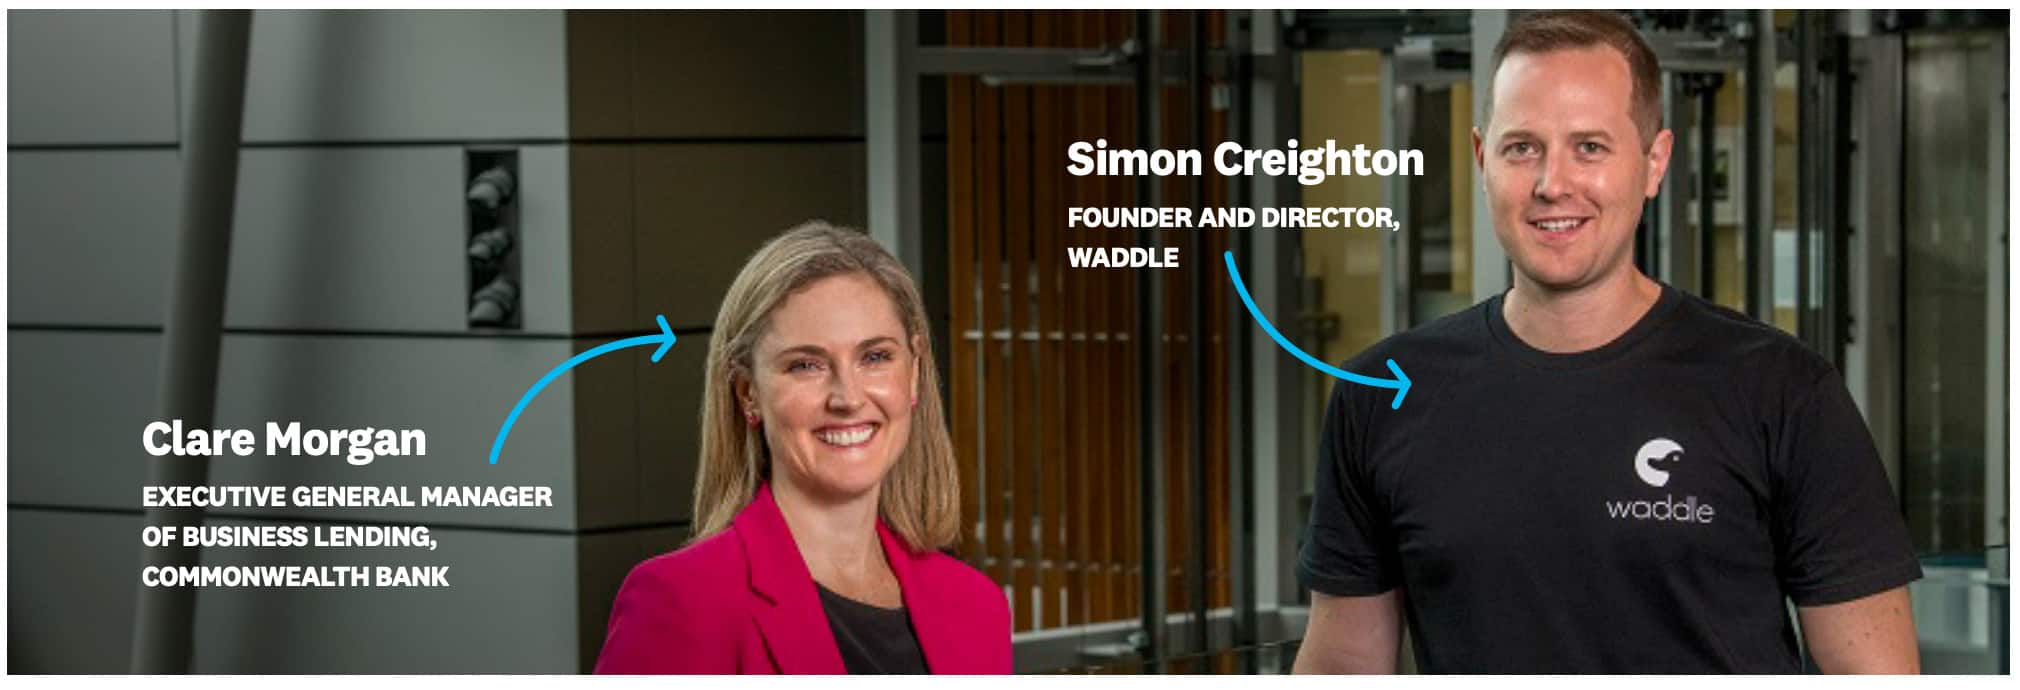 Clare Morgan, Executive General Manager of Business Lending at Commonwealth Bank and Simon Creighton, founder of Waddle.